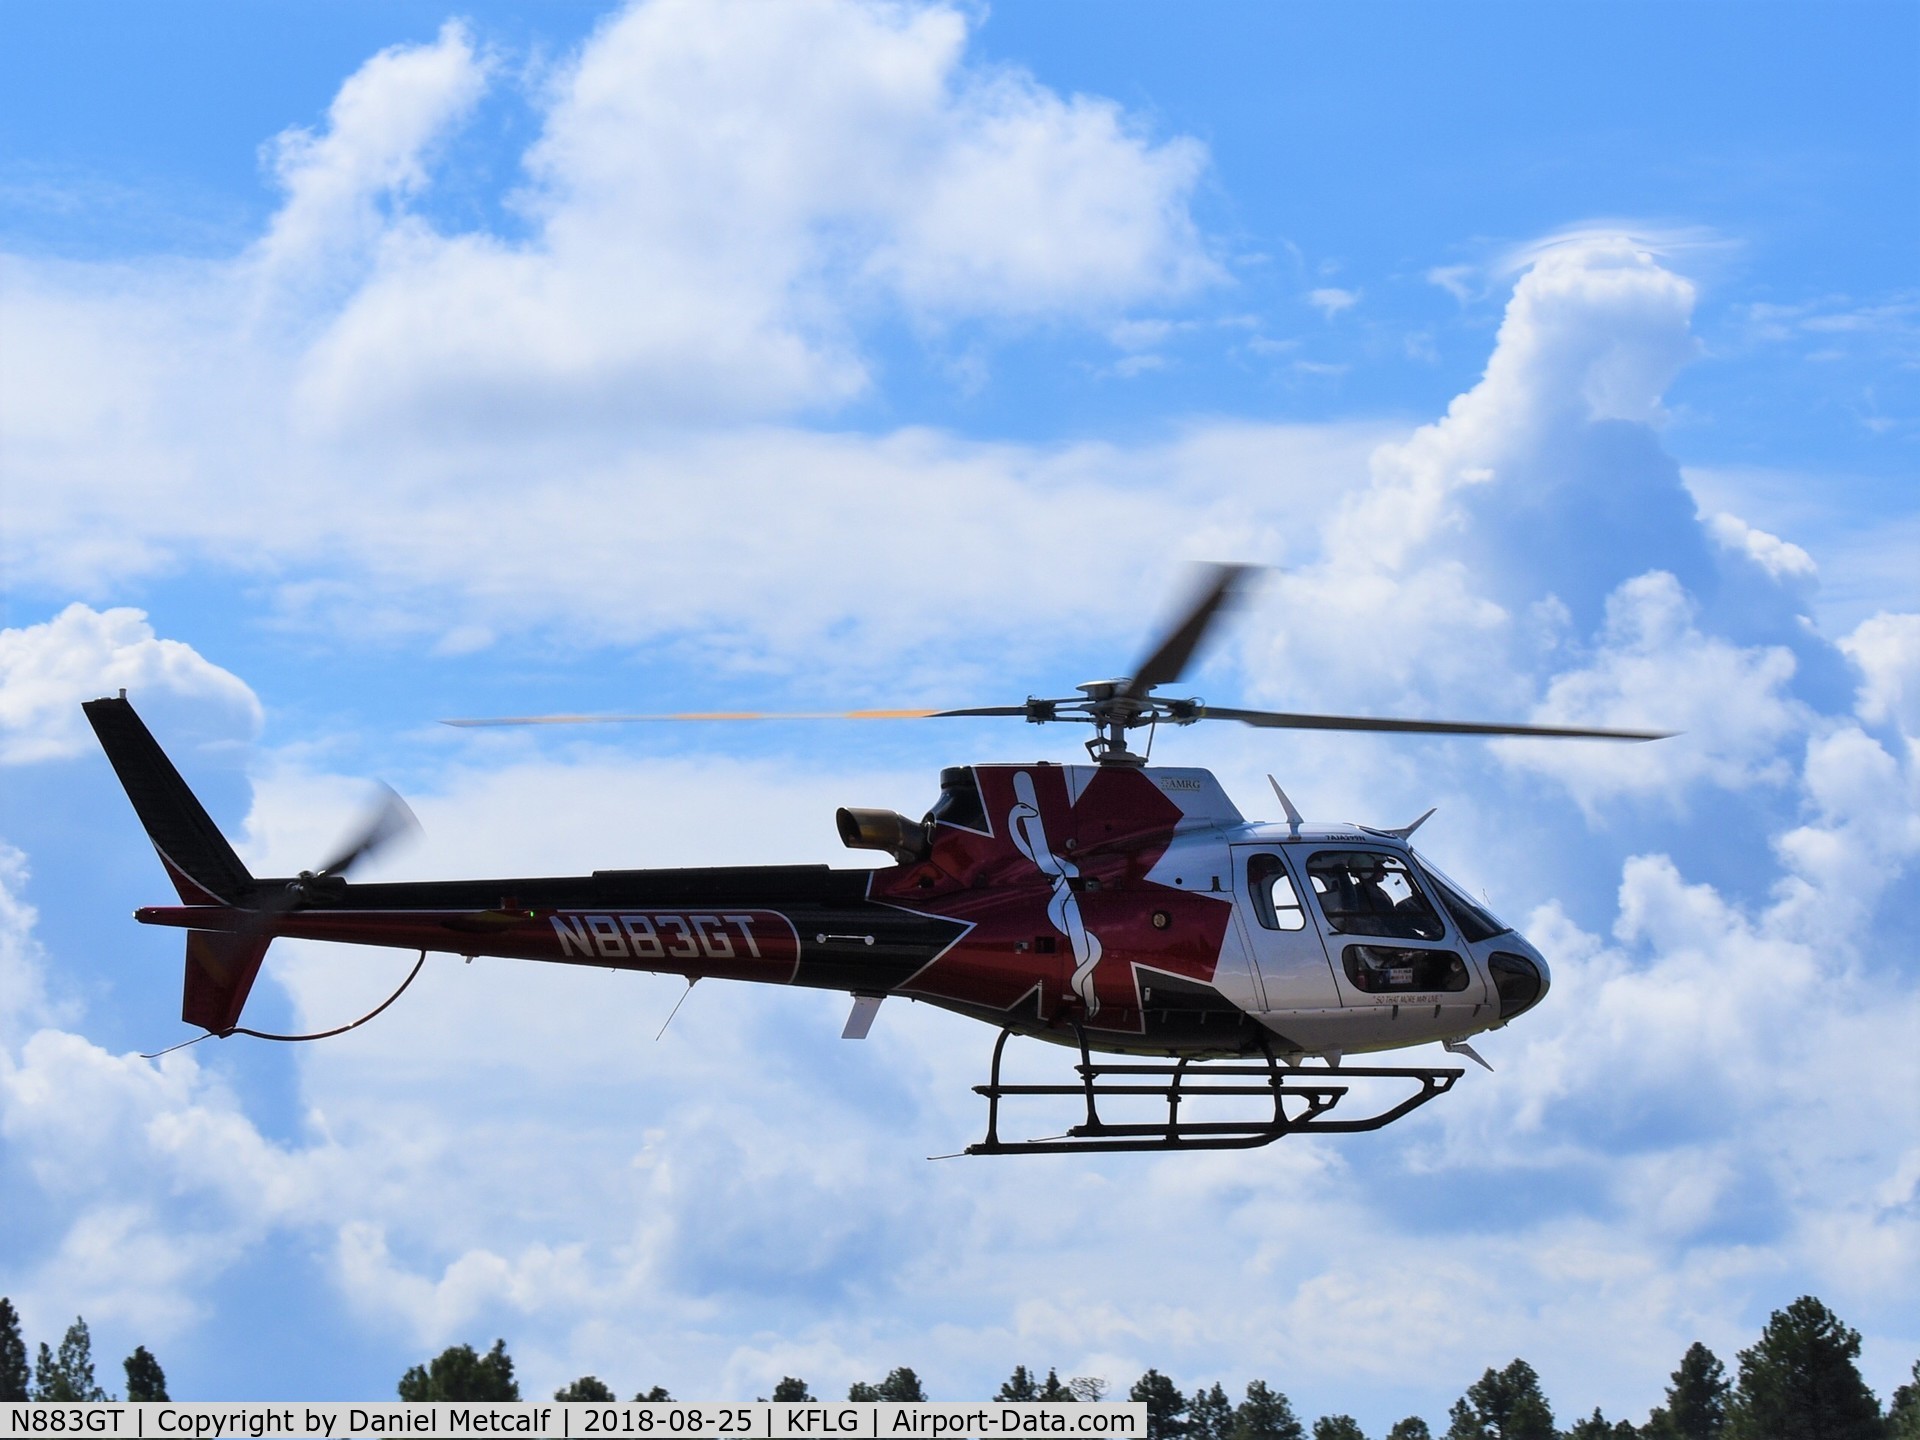 N883GT, 2015 Airbus Helicopters AS-350B-3 Ecureuil C/N 8001, Seen at Thunder over Flagstaff